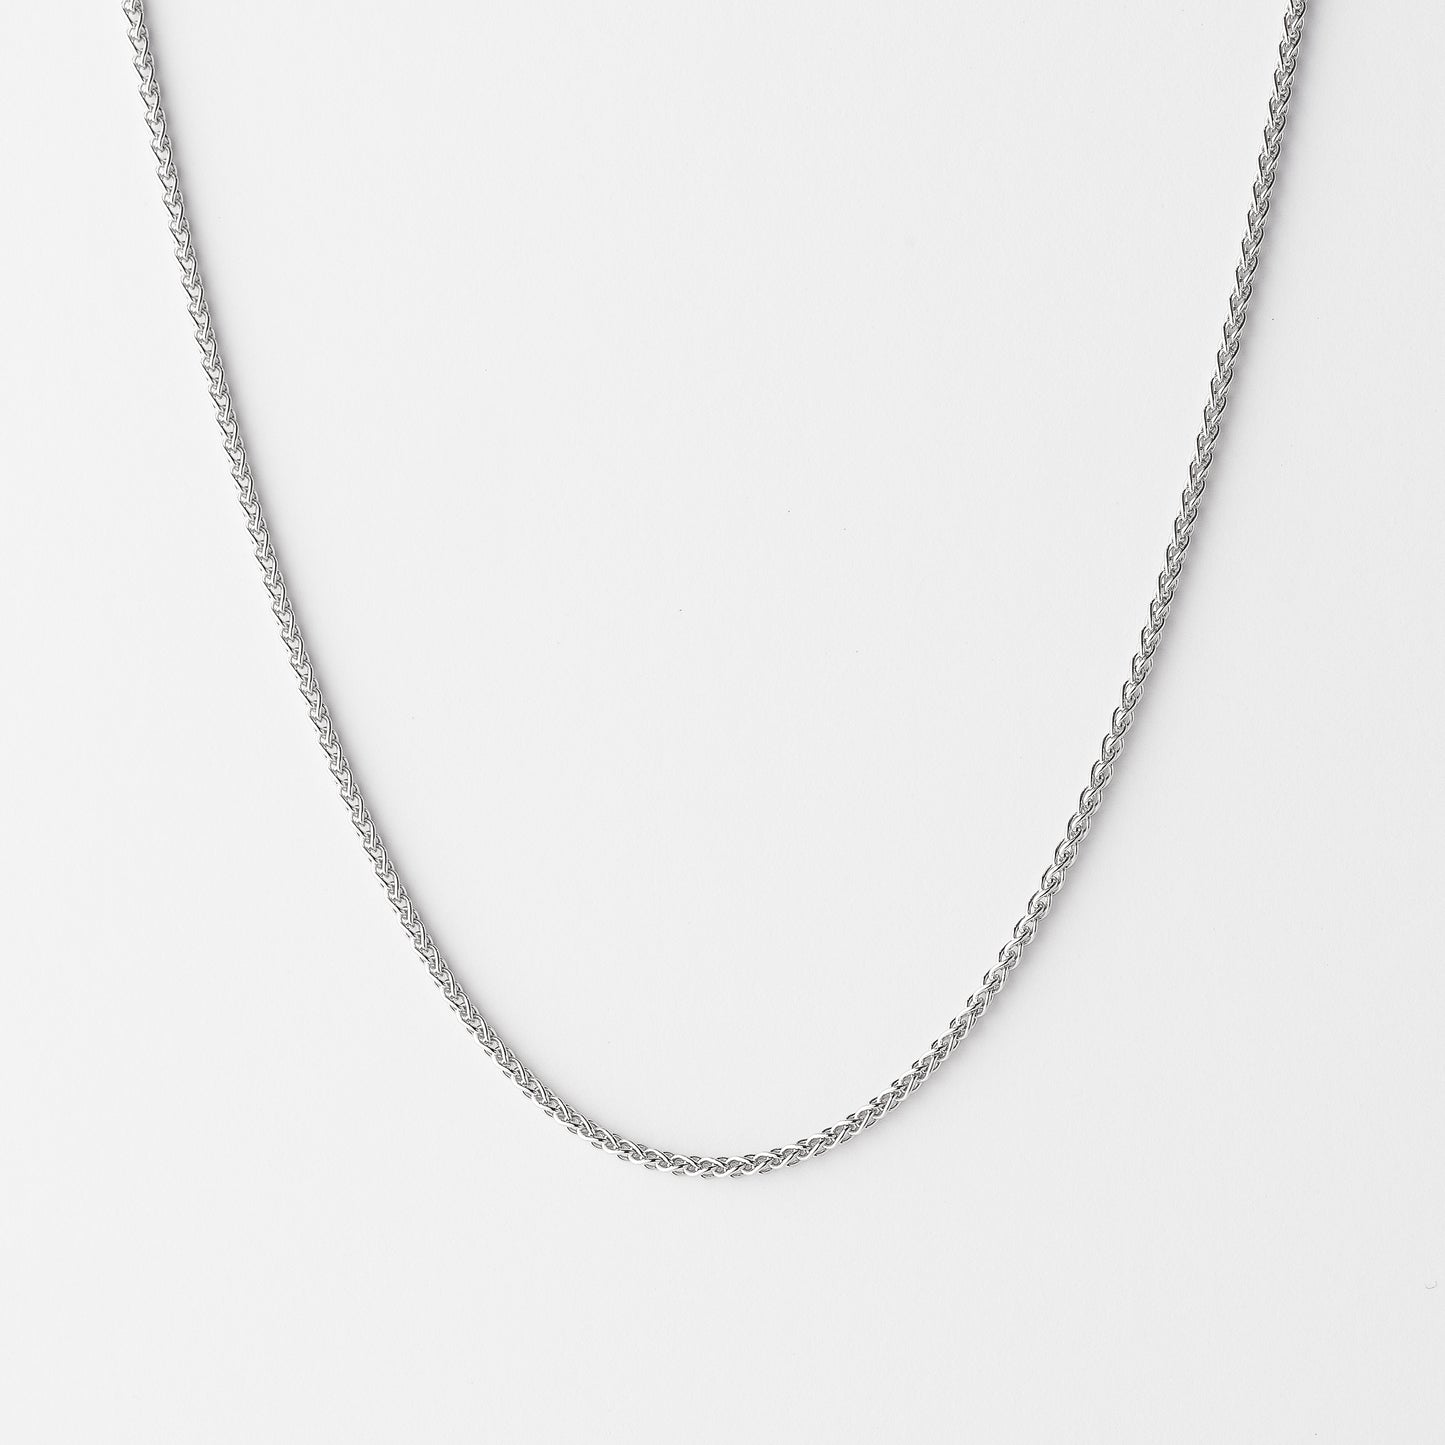 Sterling Silver 45cm Wheat Chain